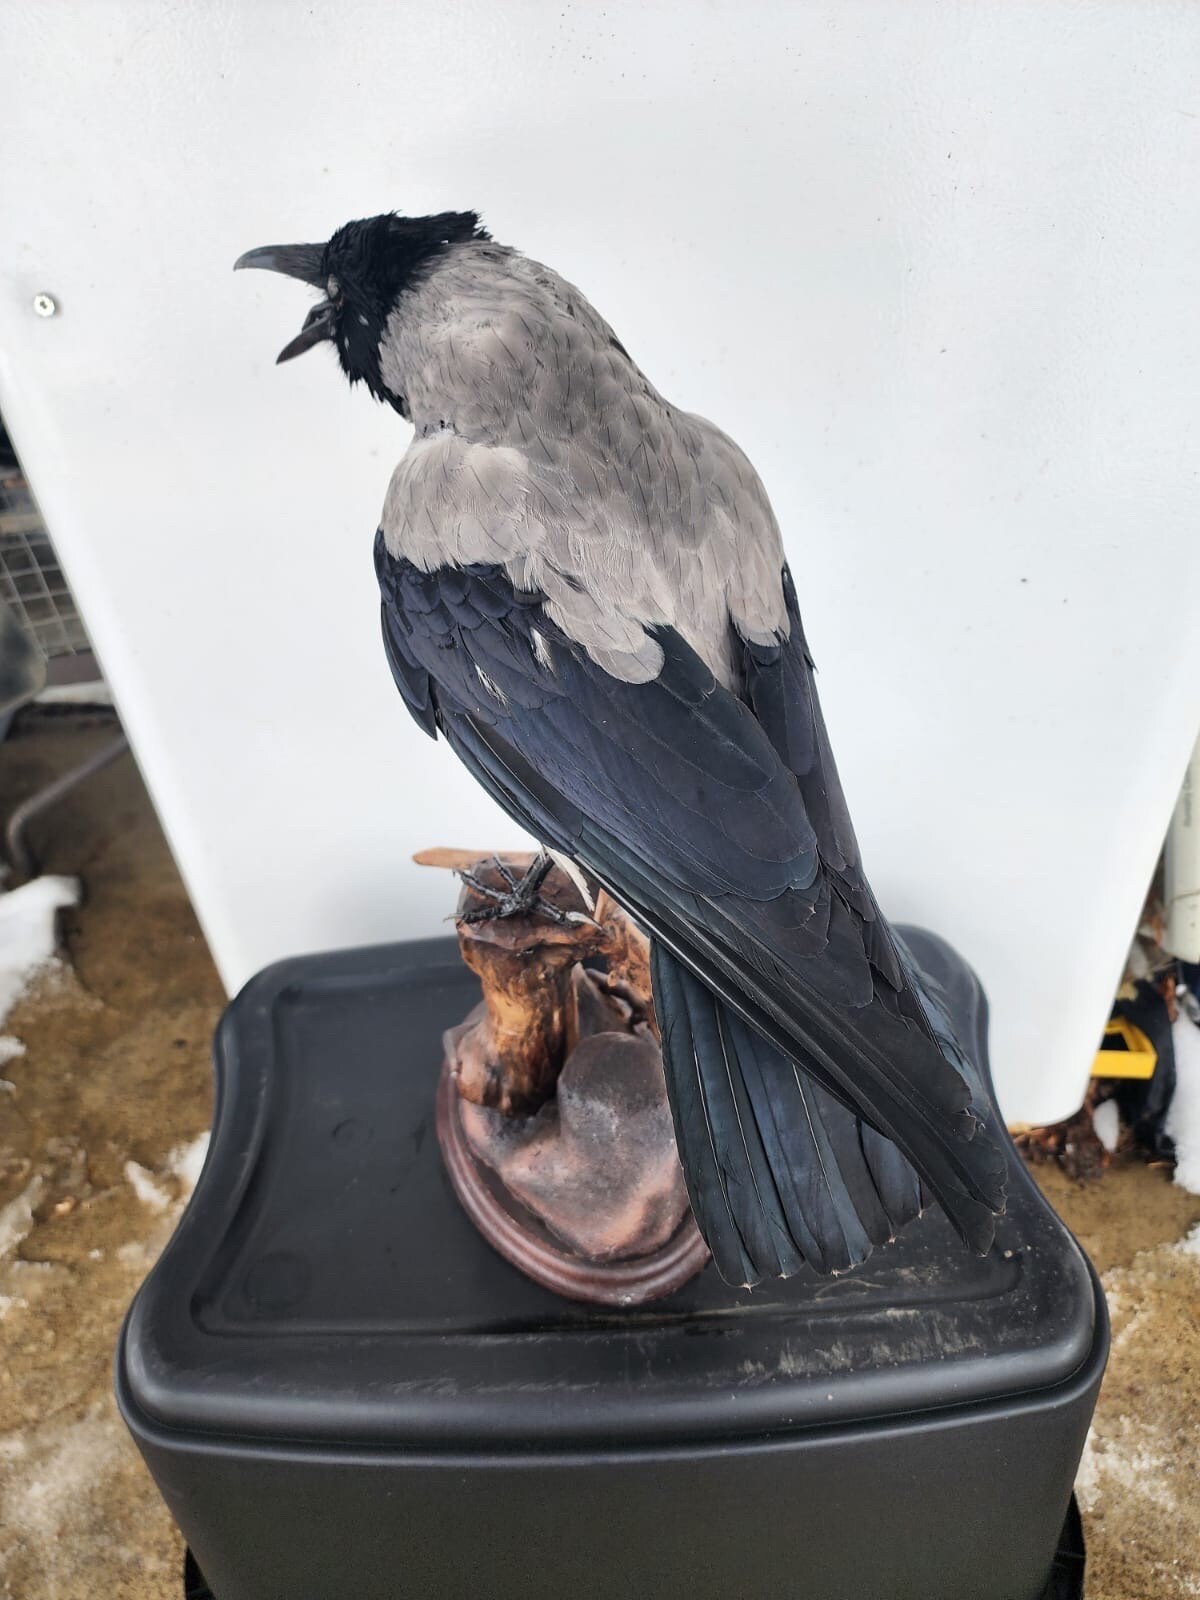 Hooded crow Taxidermy Mount real